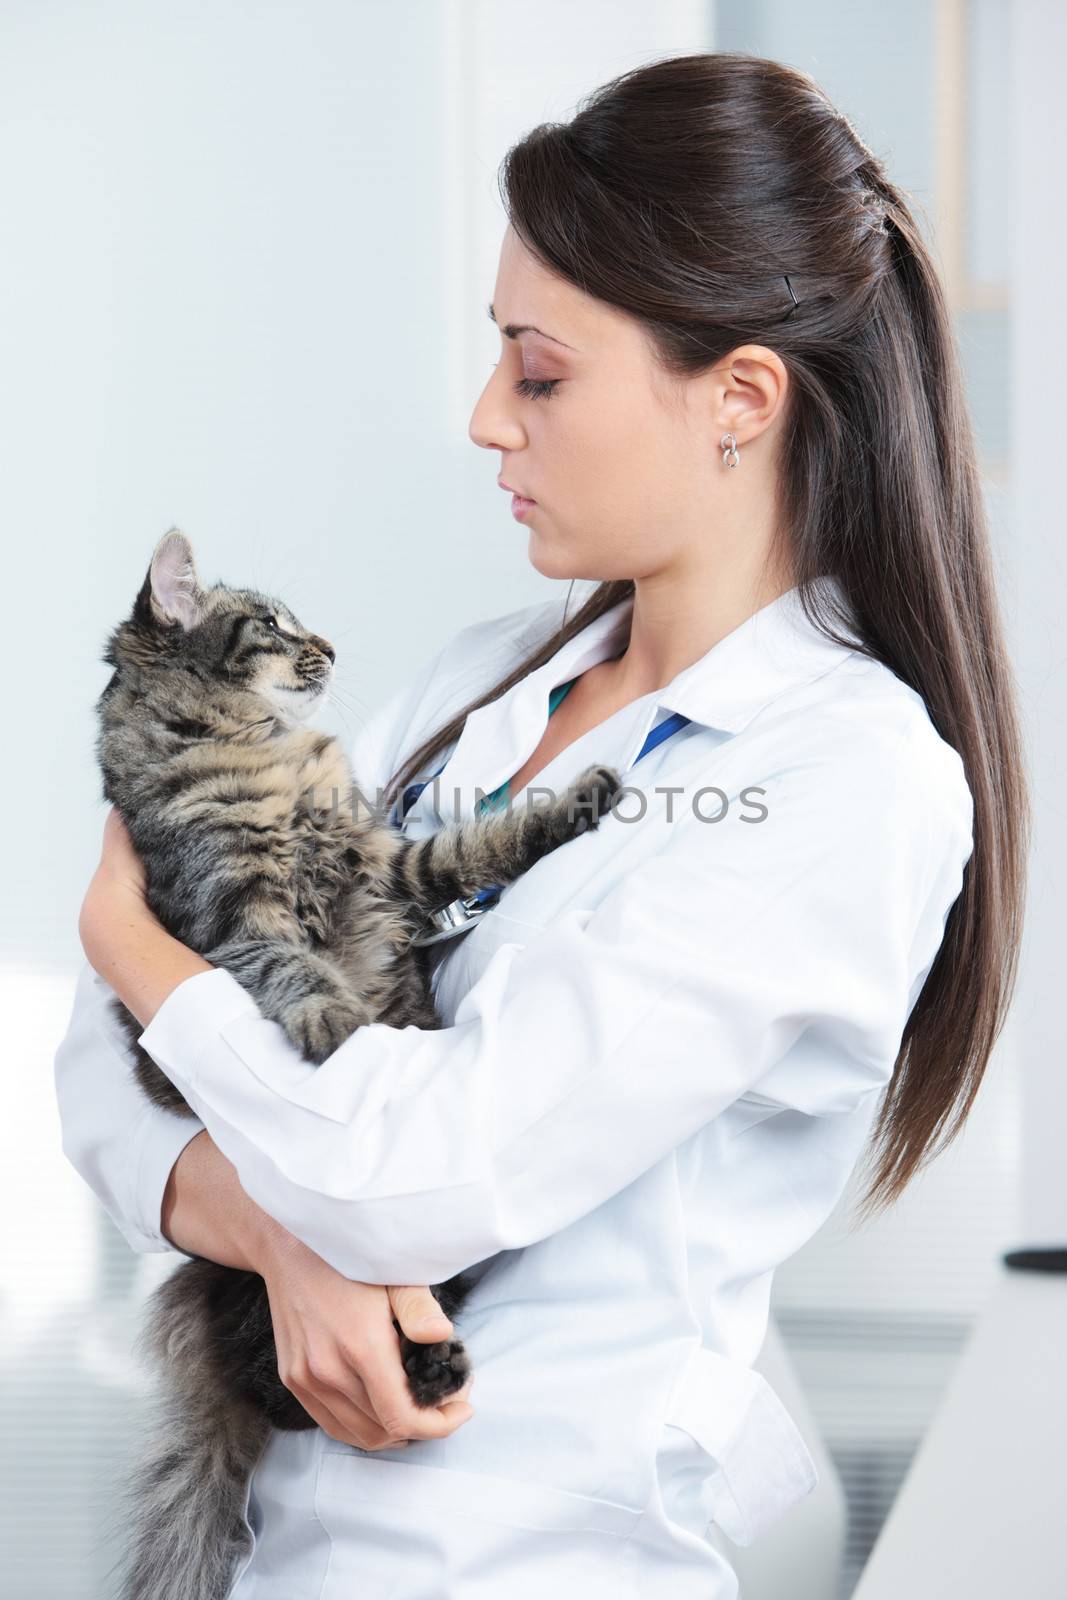 Veterinarian with a cat by stokkete